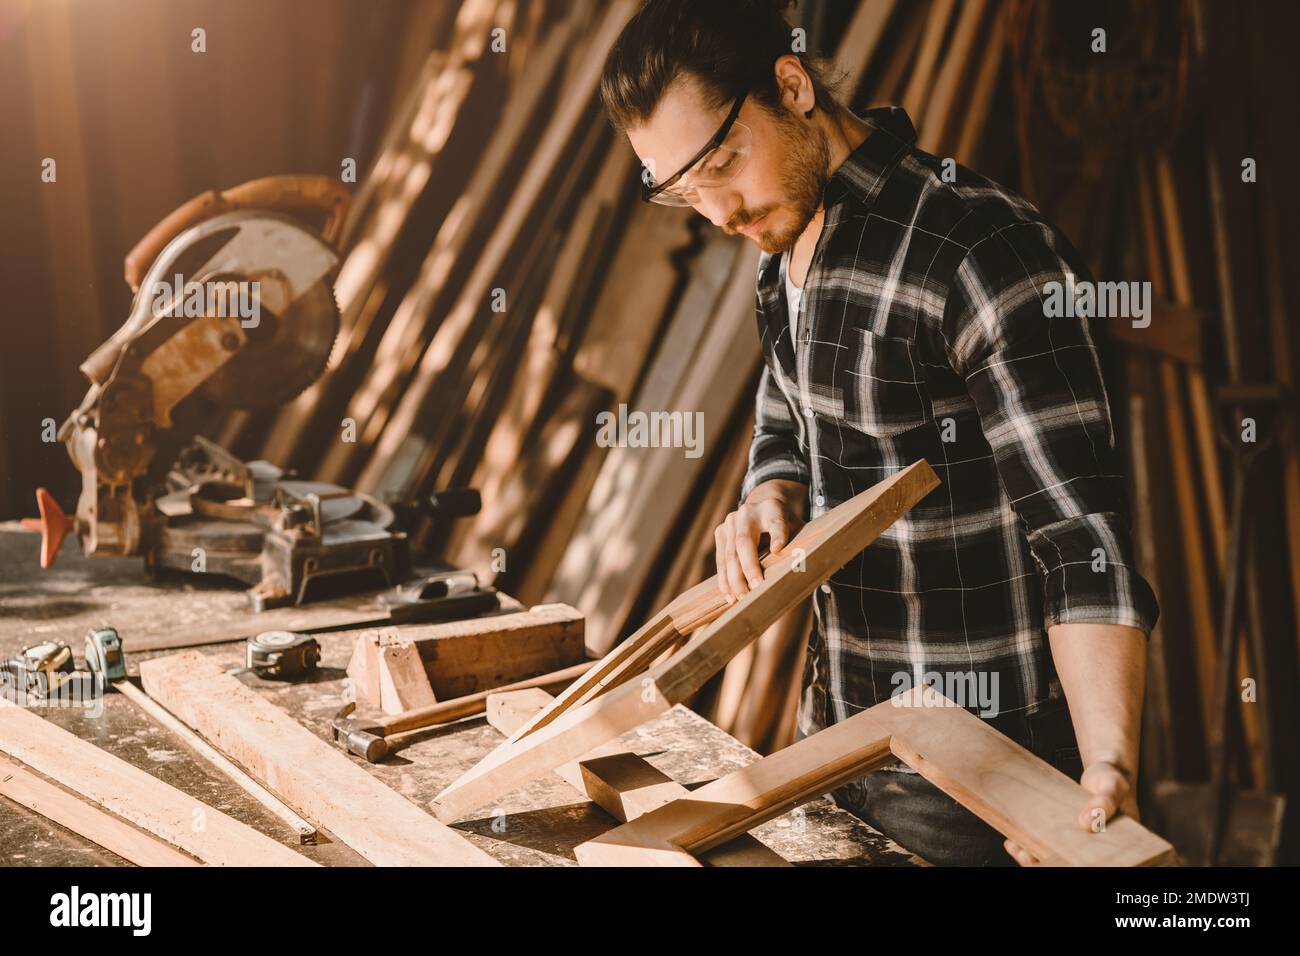 male wood furniture joiner work in DIY wooden workshop real authentic people worker Stock Photo